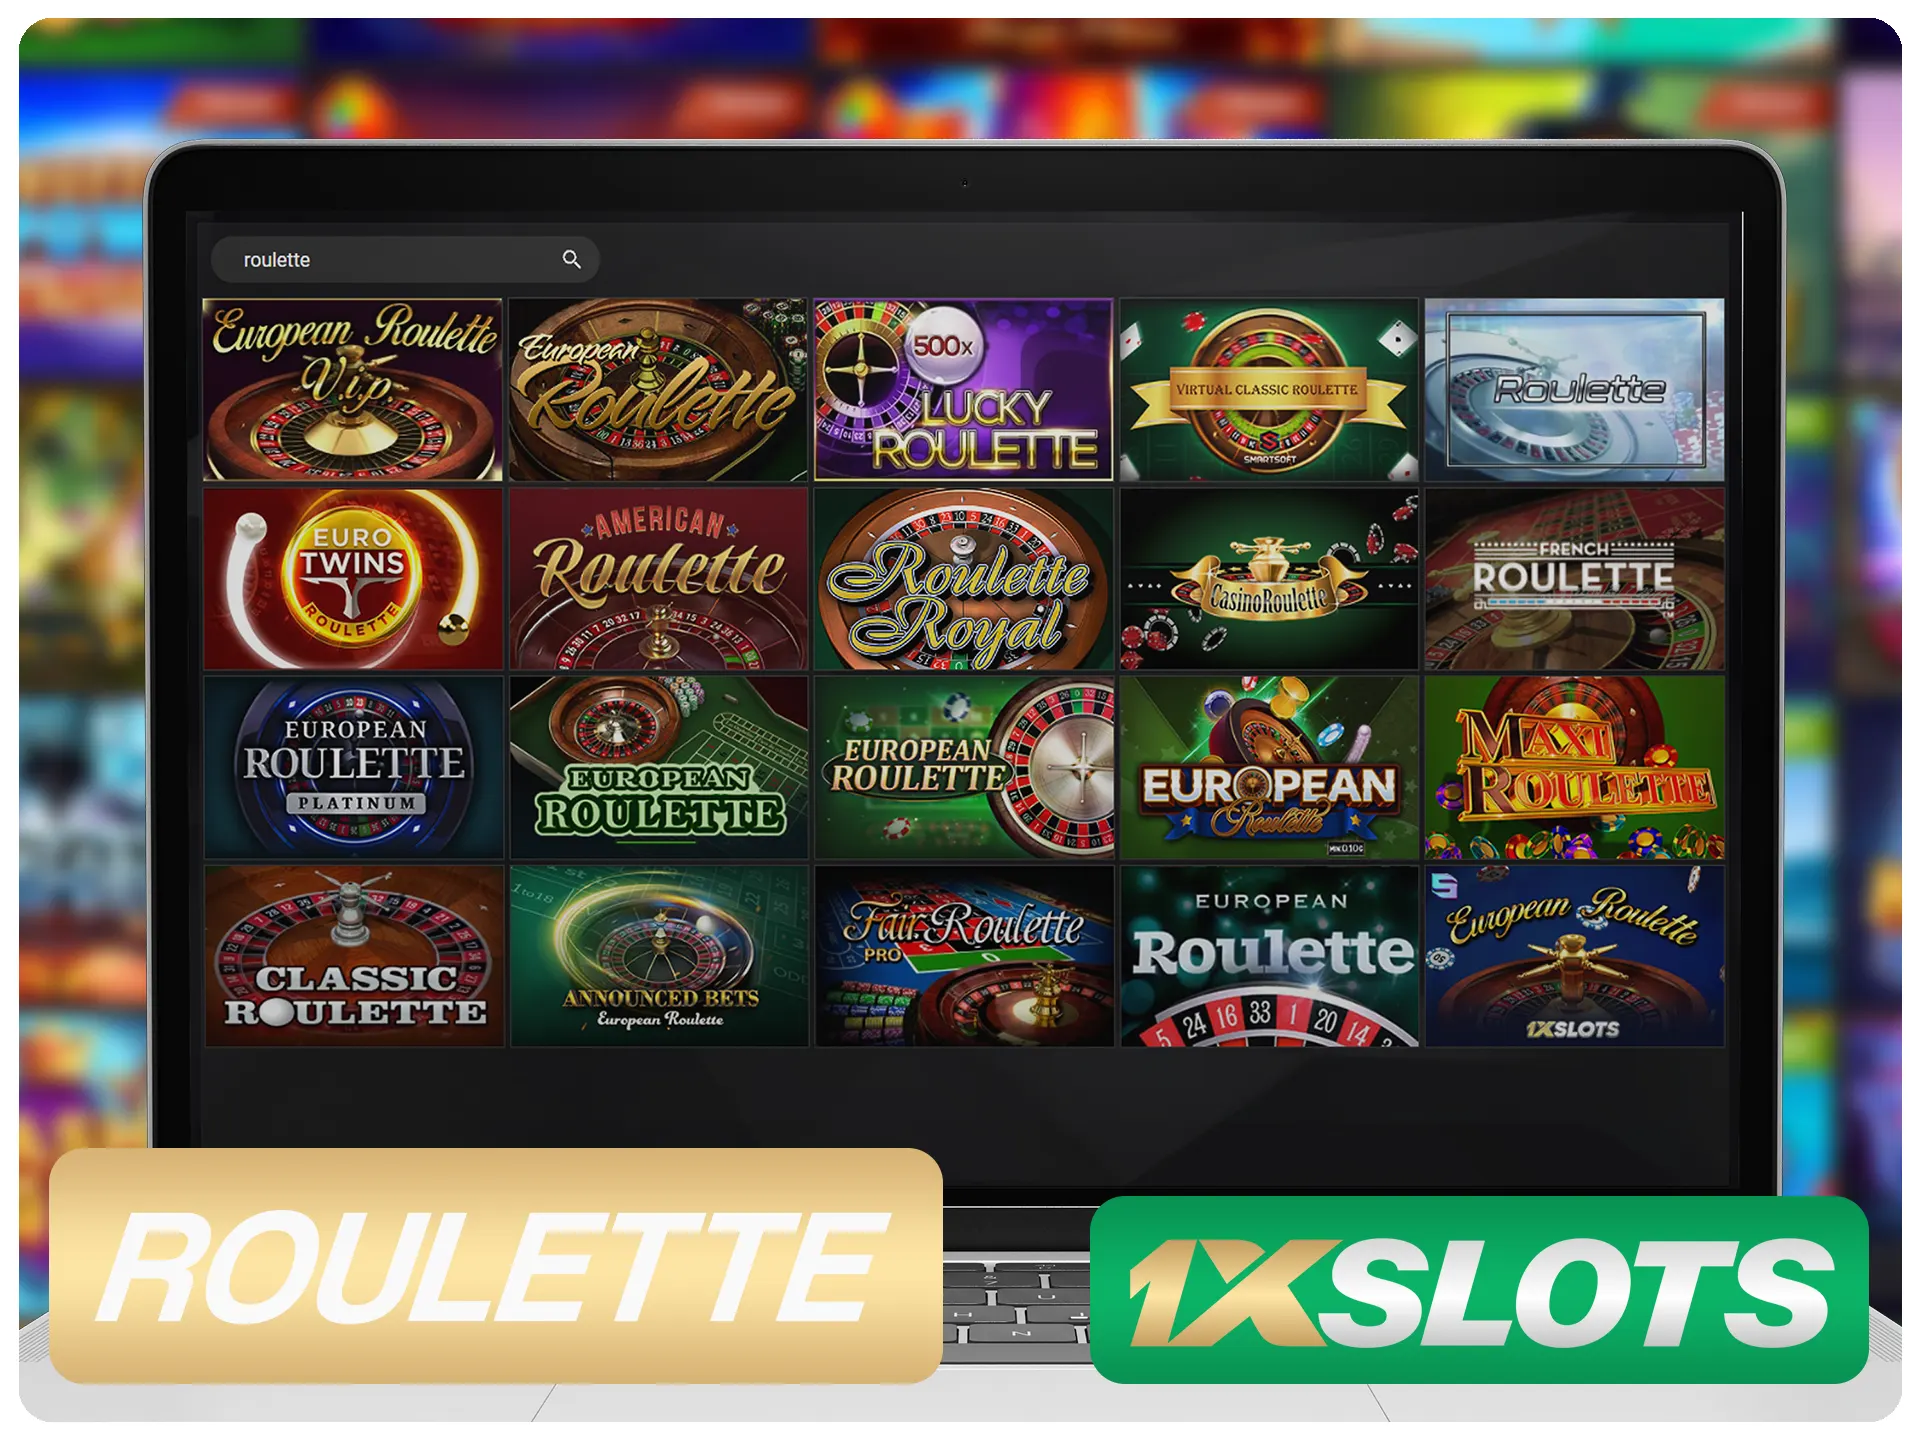 Spin 1xSlots roulette and win money.